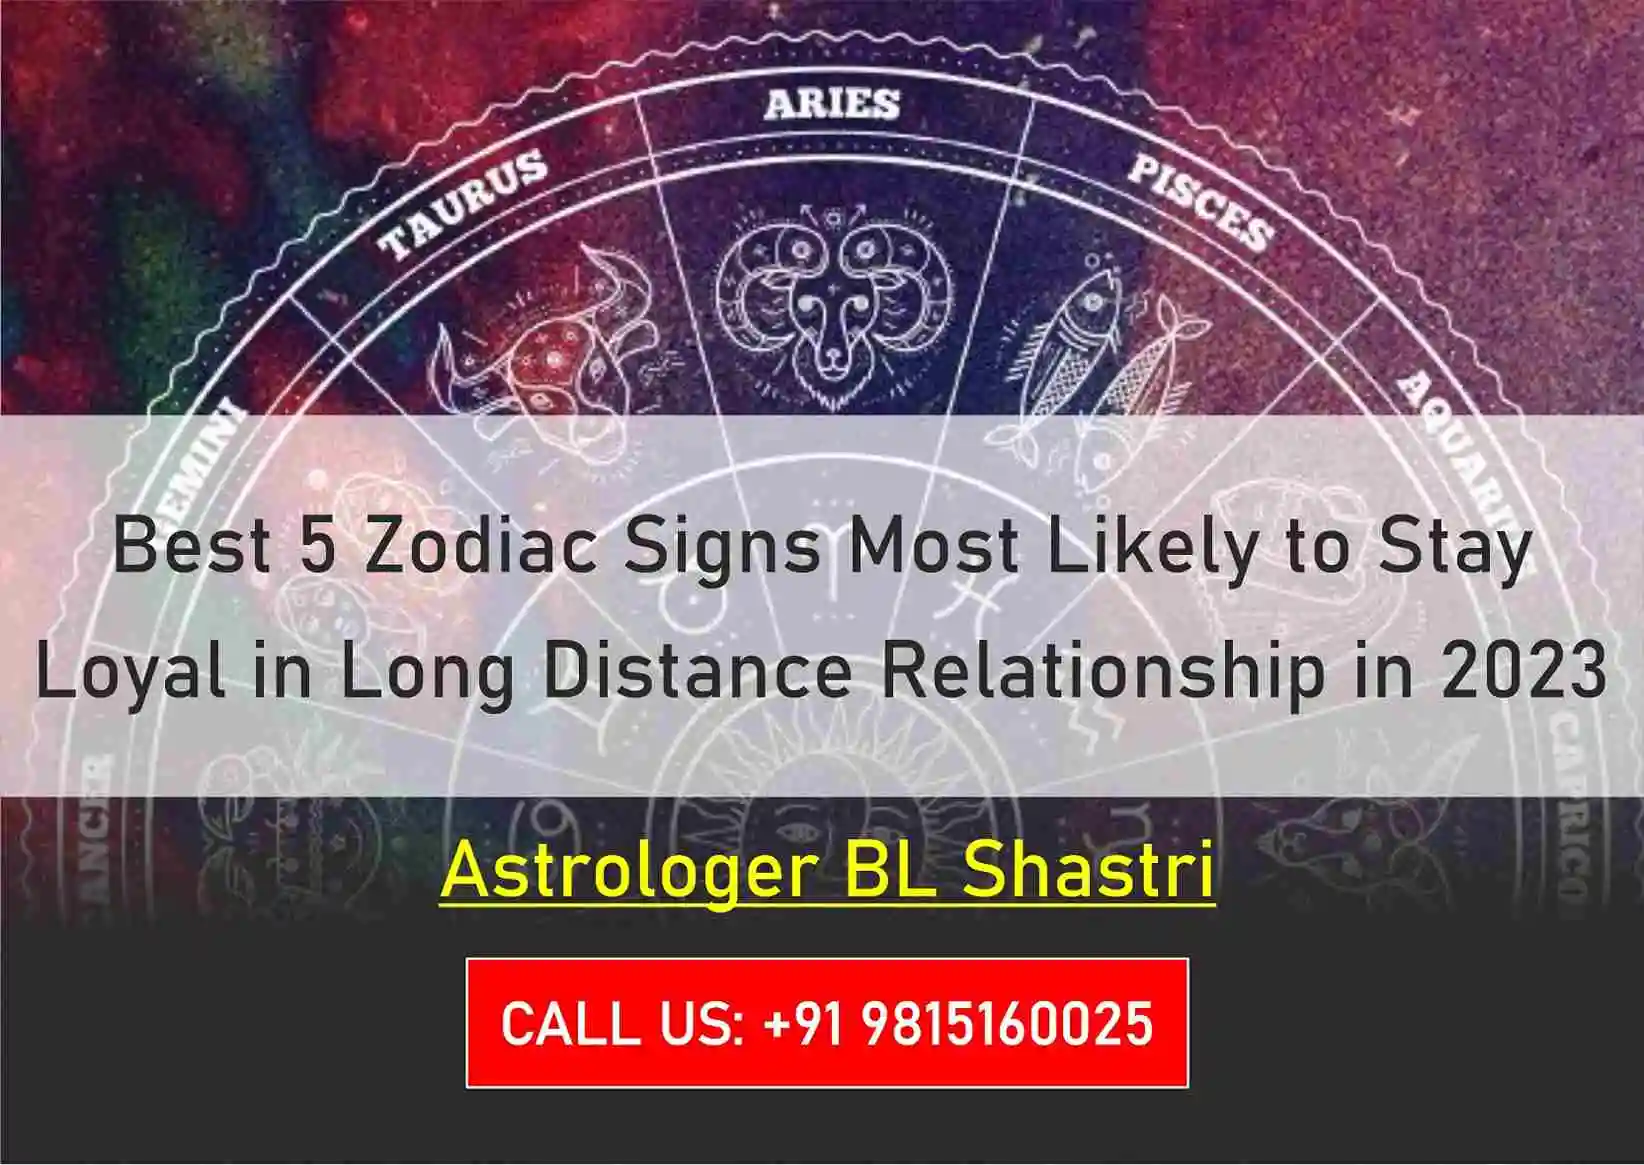 Best 5 Zodiac Signs Most Likely to Stay Loyal in Long Distance Relationship in 2023